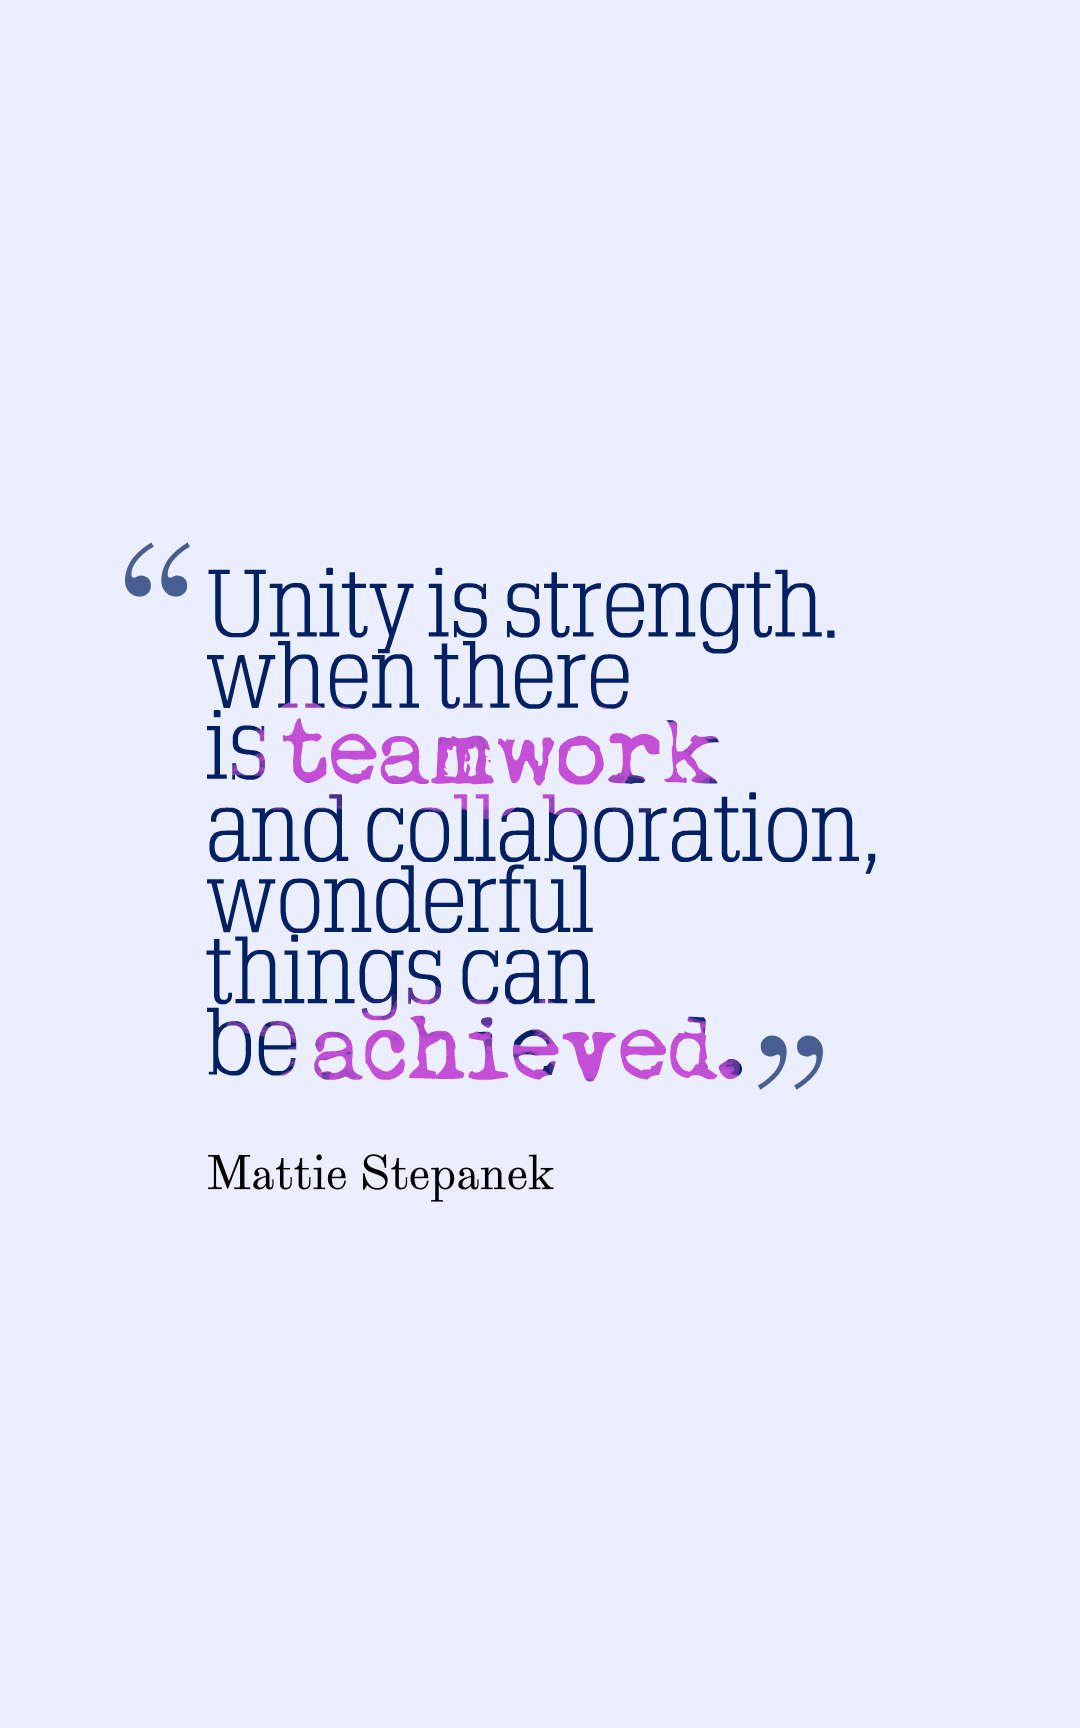 Unity is strength... when there is teamwork and collaboration, wonderful things can be achieved.